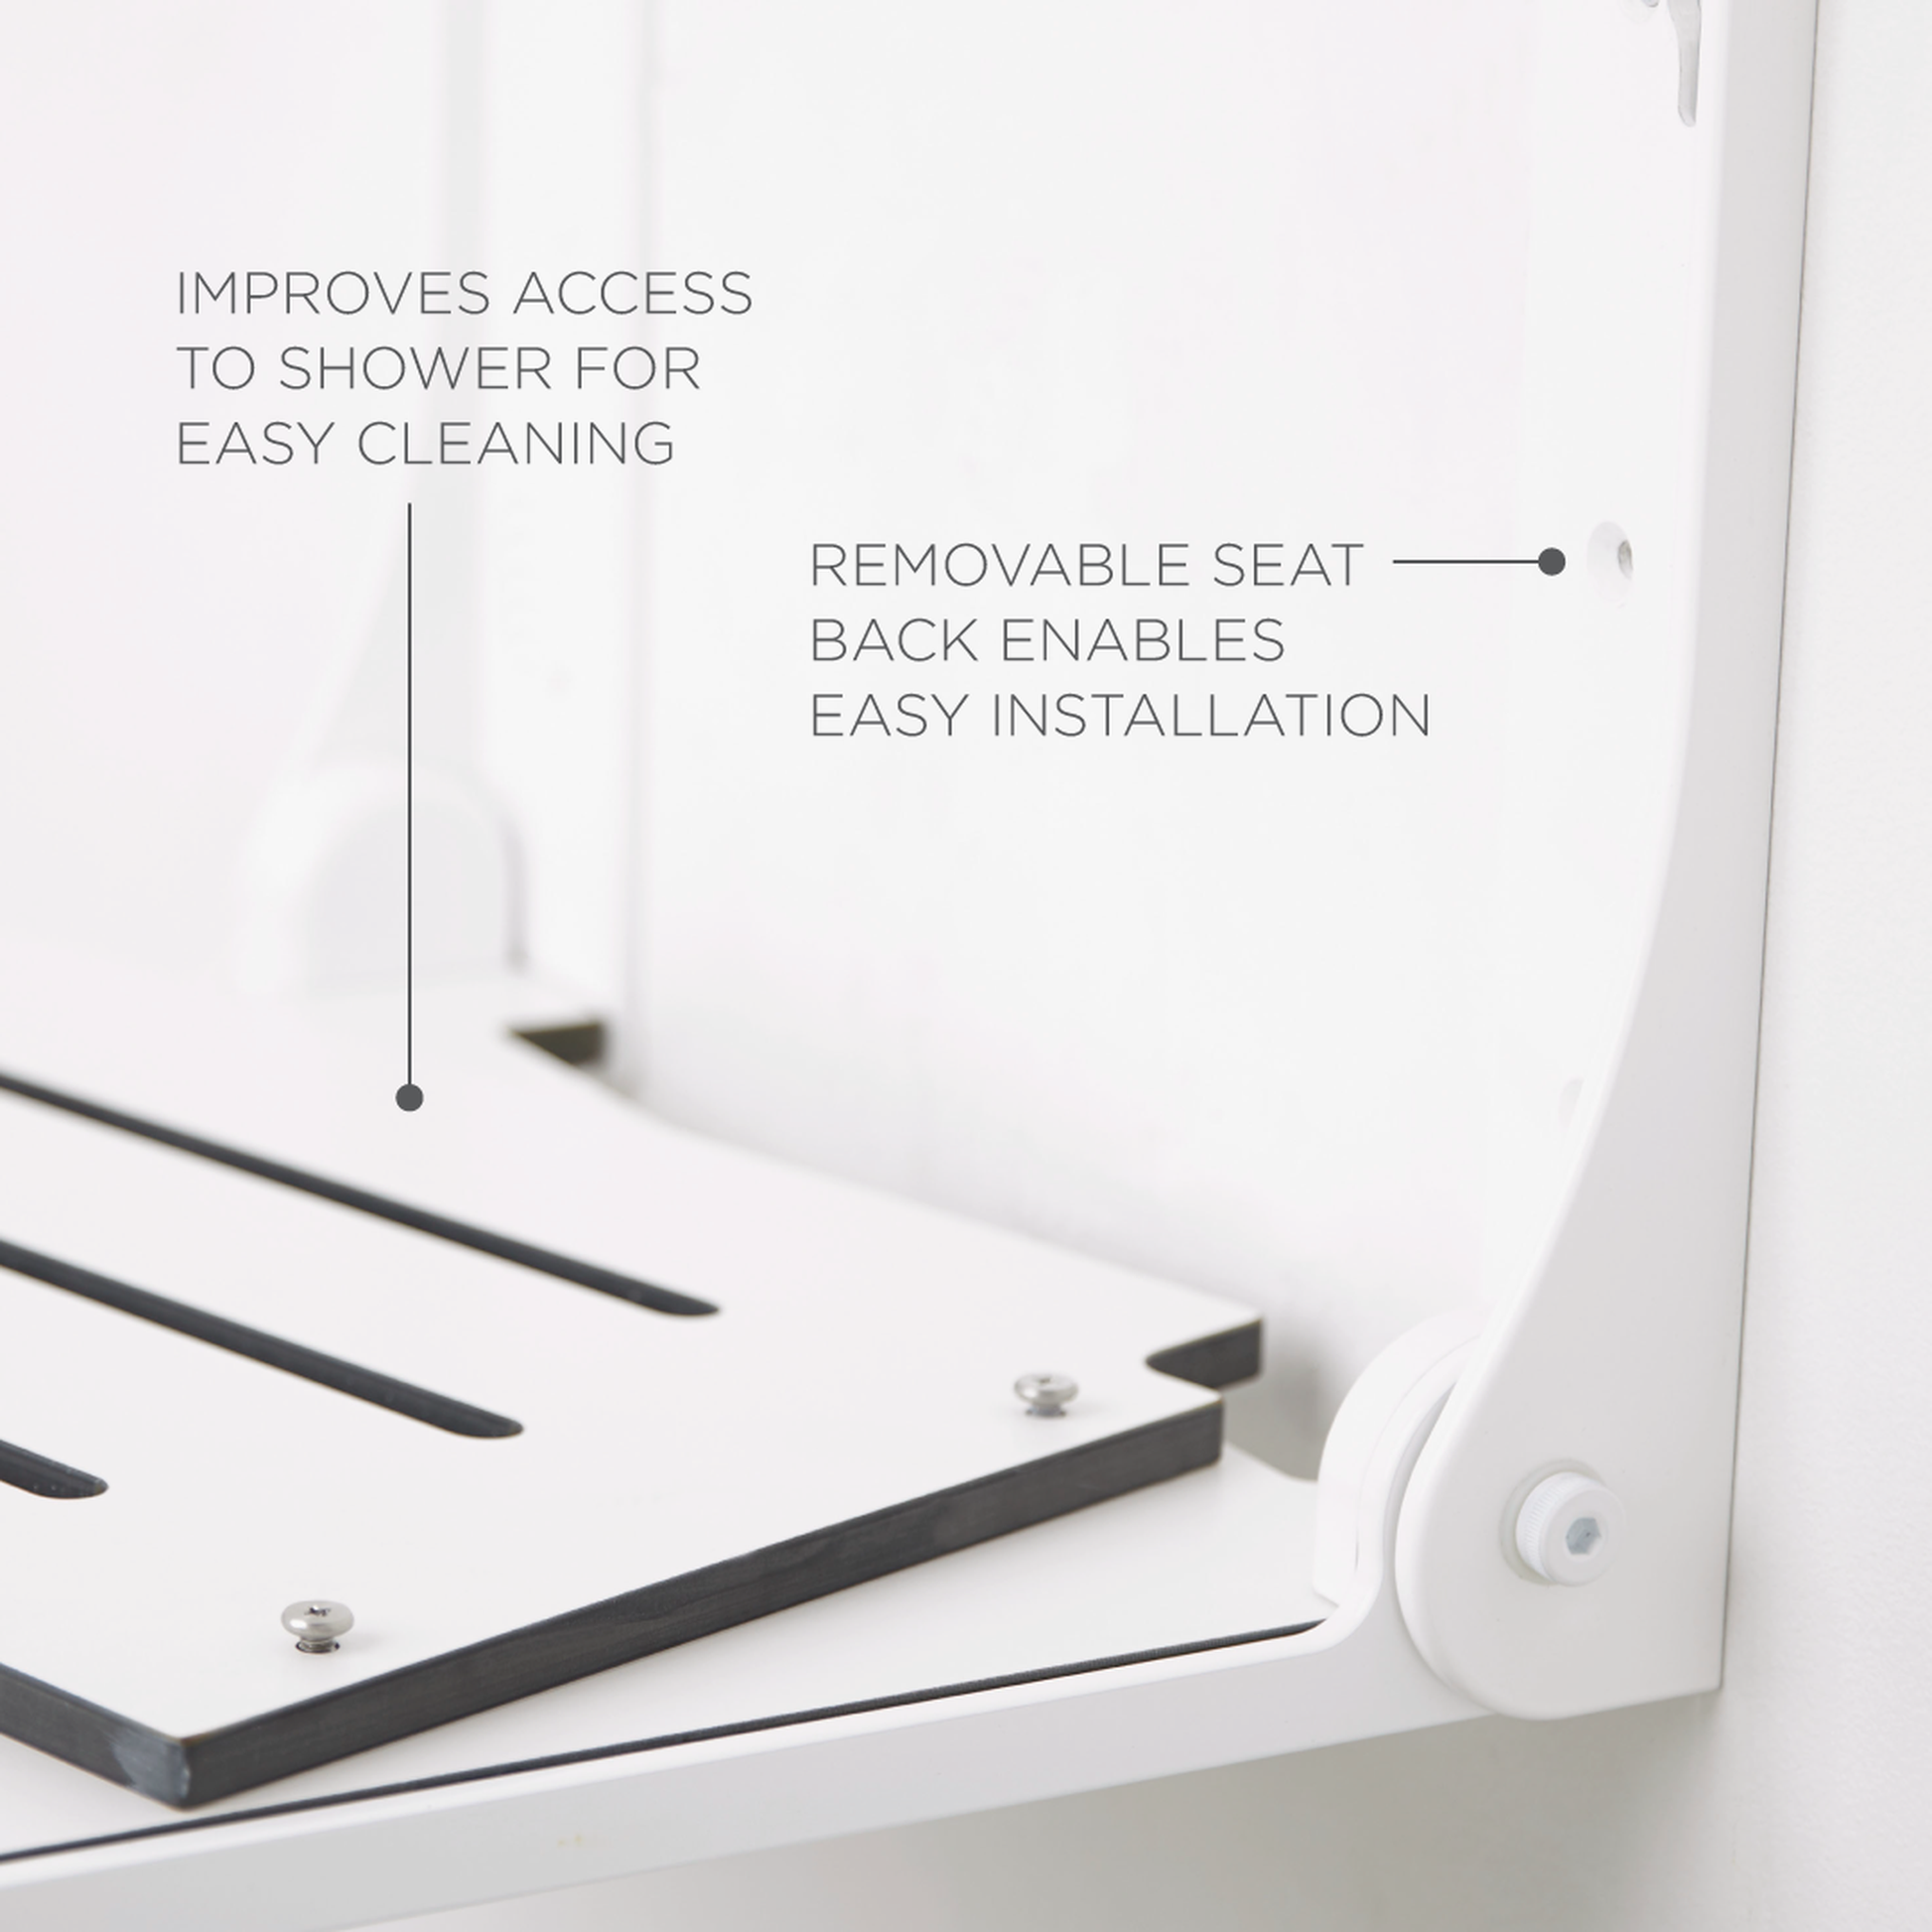 Seachrome Silhouette 19" Phenolic White Seat Top and White Frame Wall Mounted High Back Shower Seat